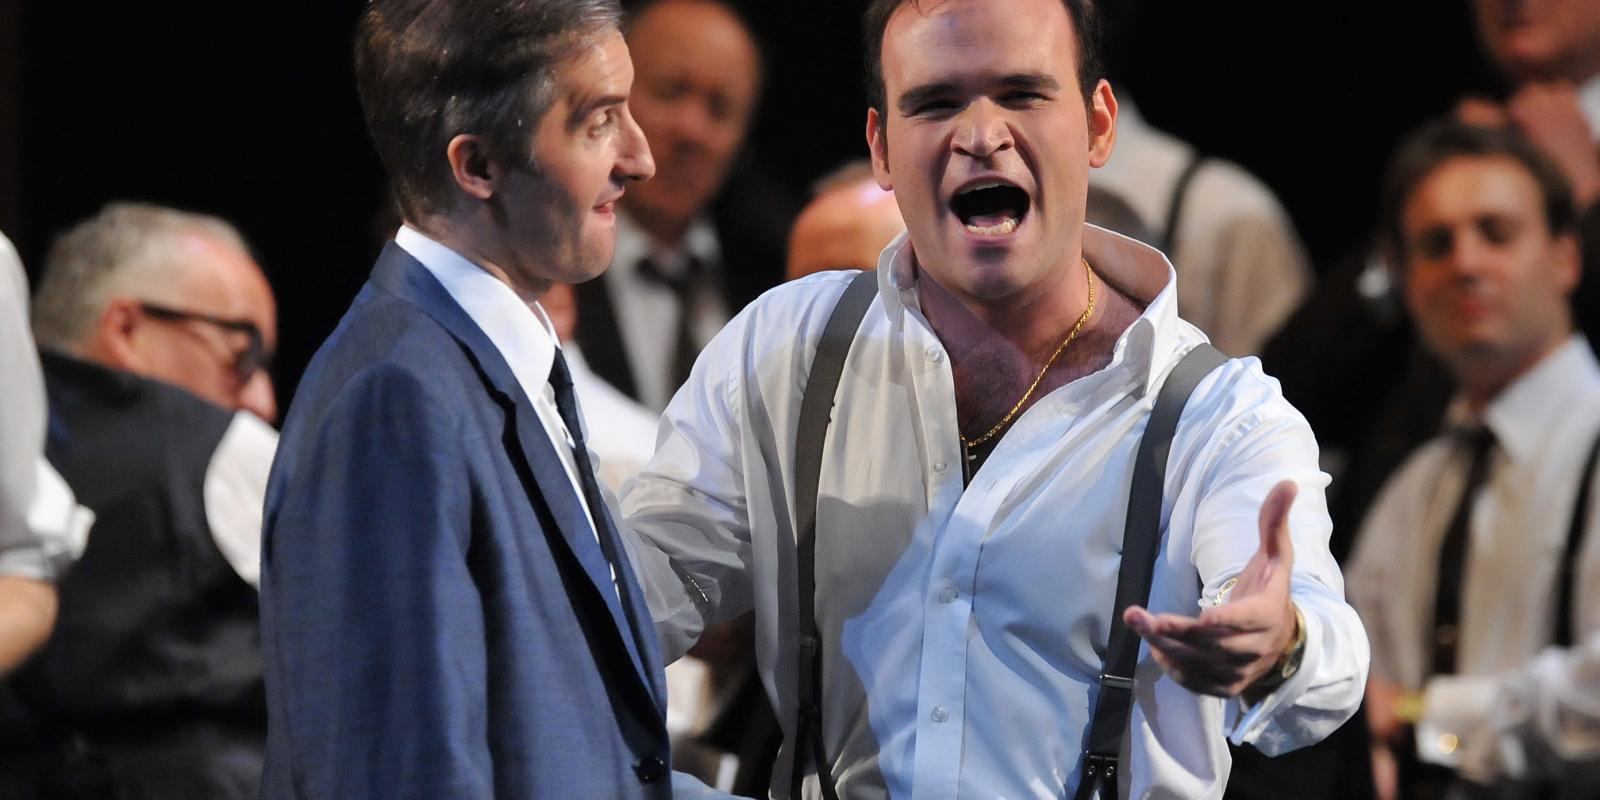 characters in suits and suspender belts performing on stage in Rigoletto